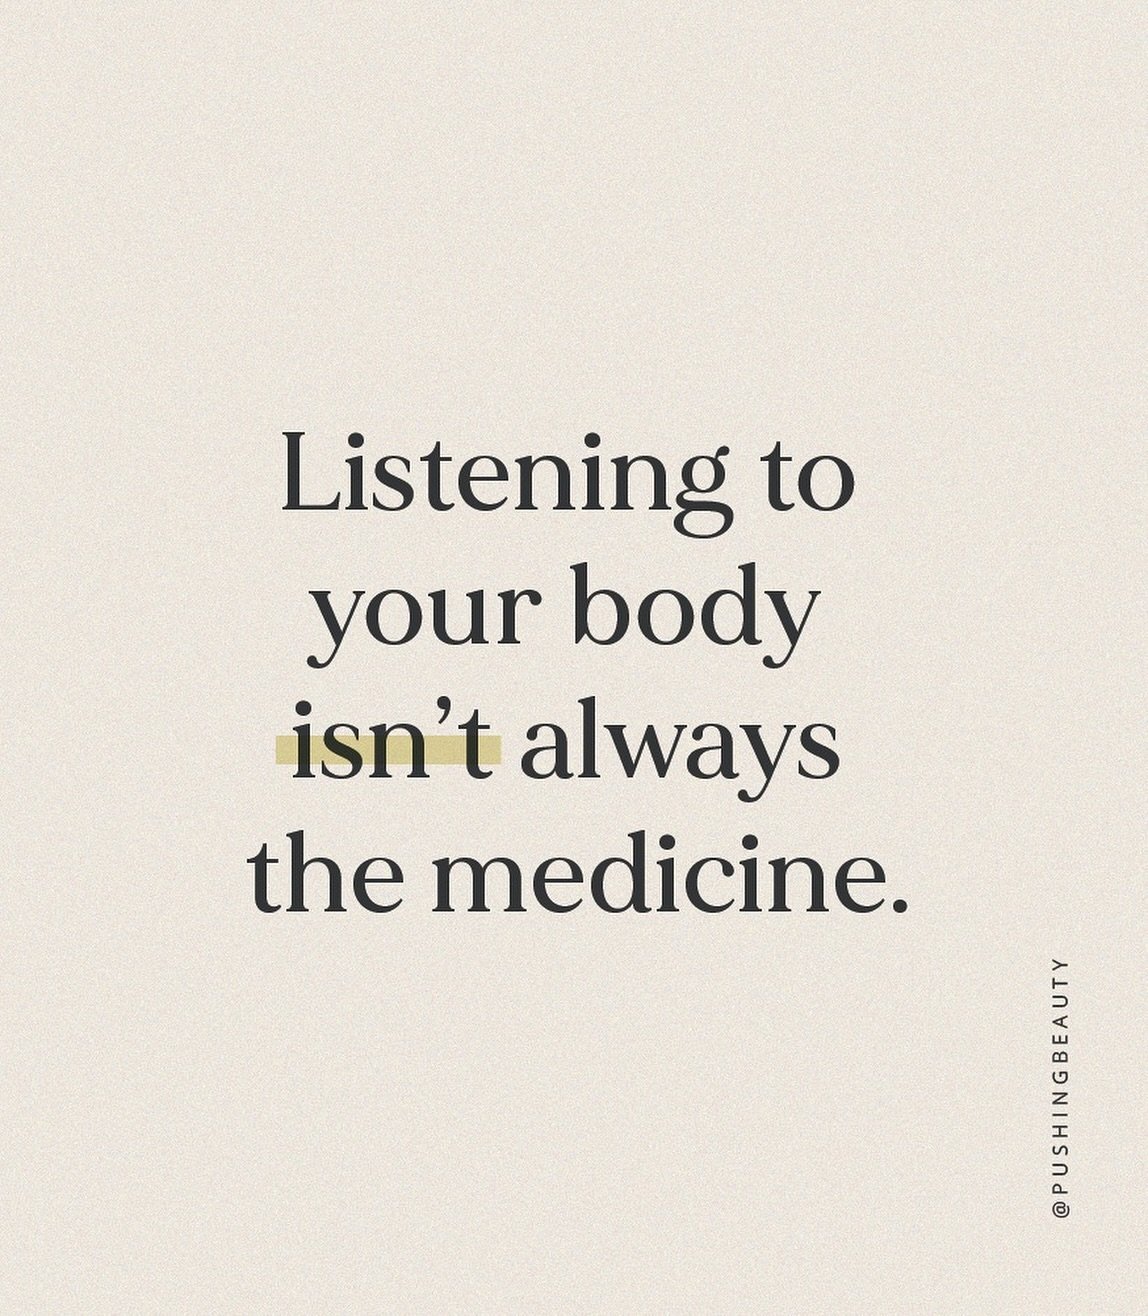 Listening to your body isn&rsquo;t always the medicine. Mind body symptoms use fatigue, pain, anxiety, and depression as a protective mechanism to keep you safe. In these cases, listening to the body creates more of the same symptom. It&rsquo;s why y